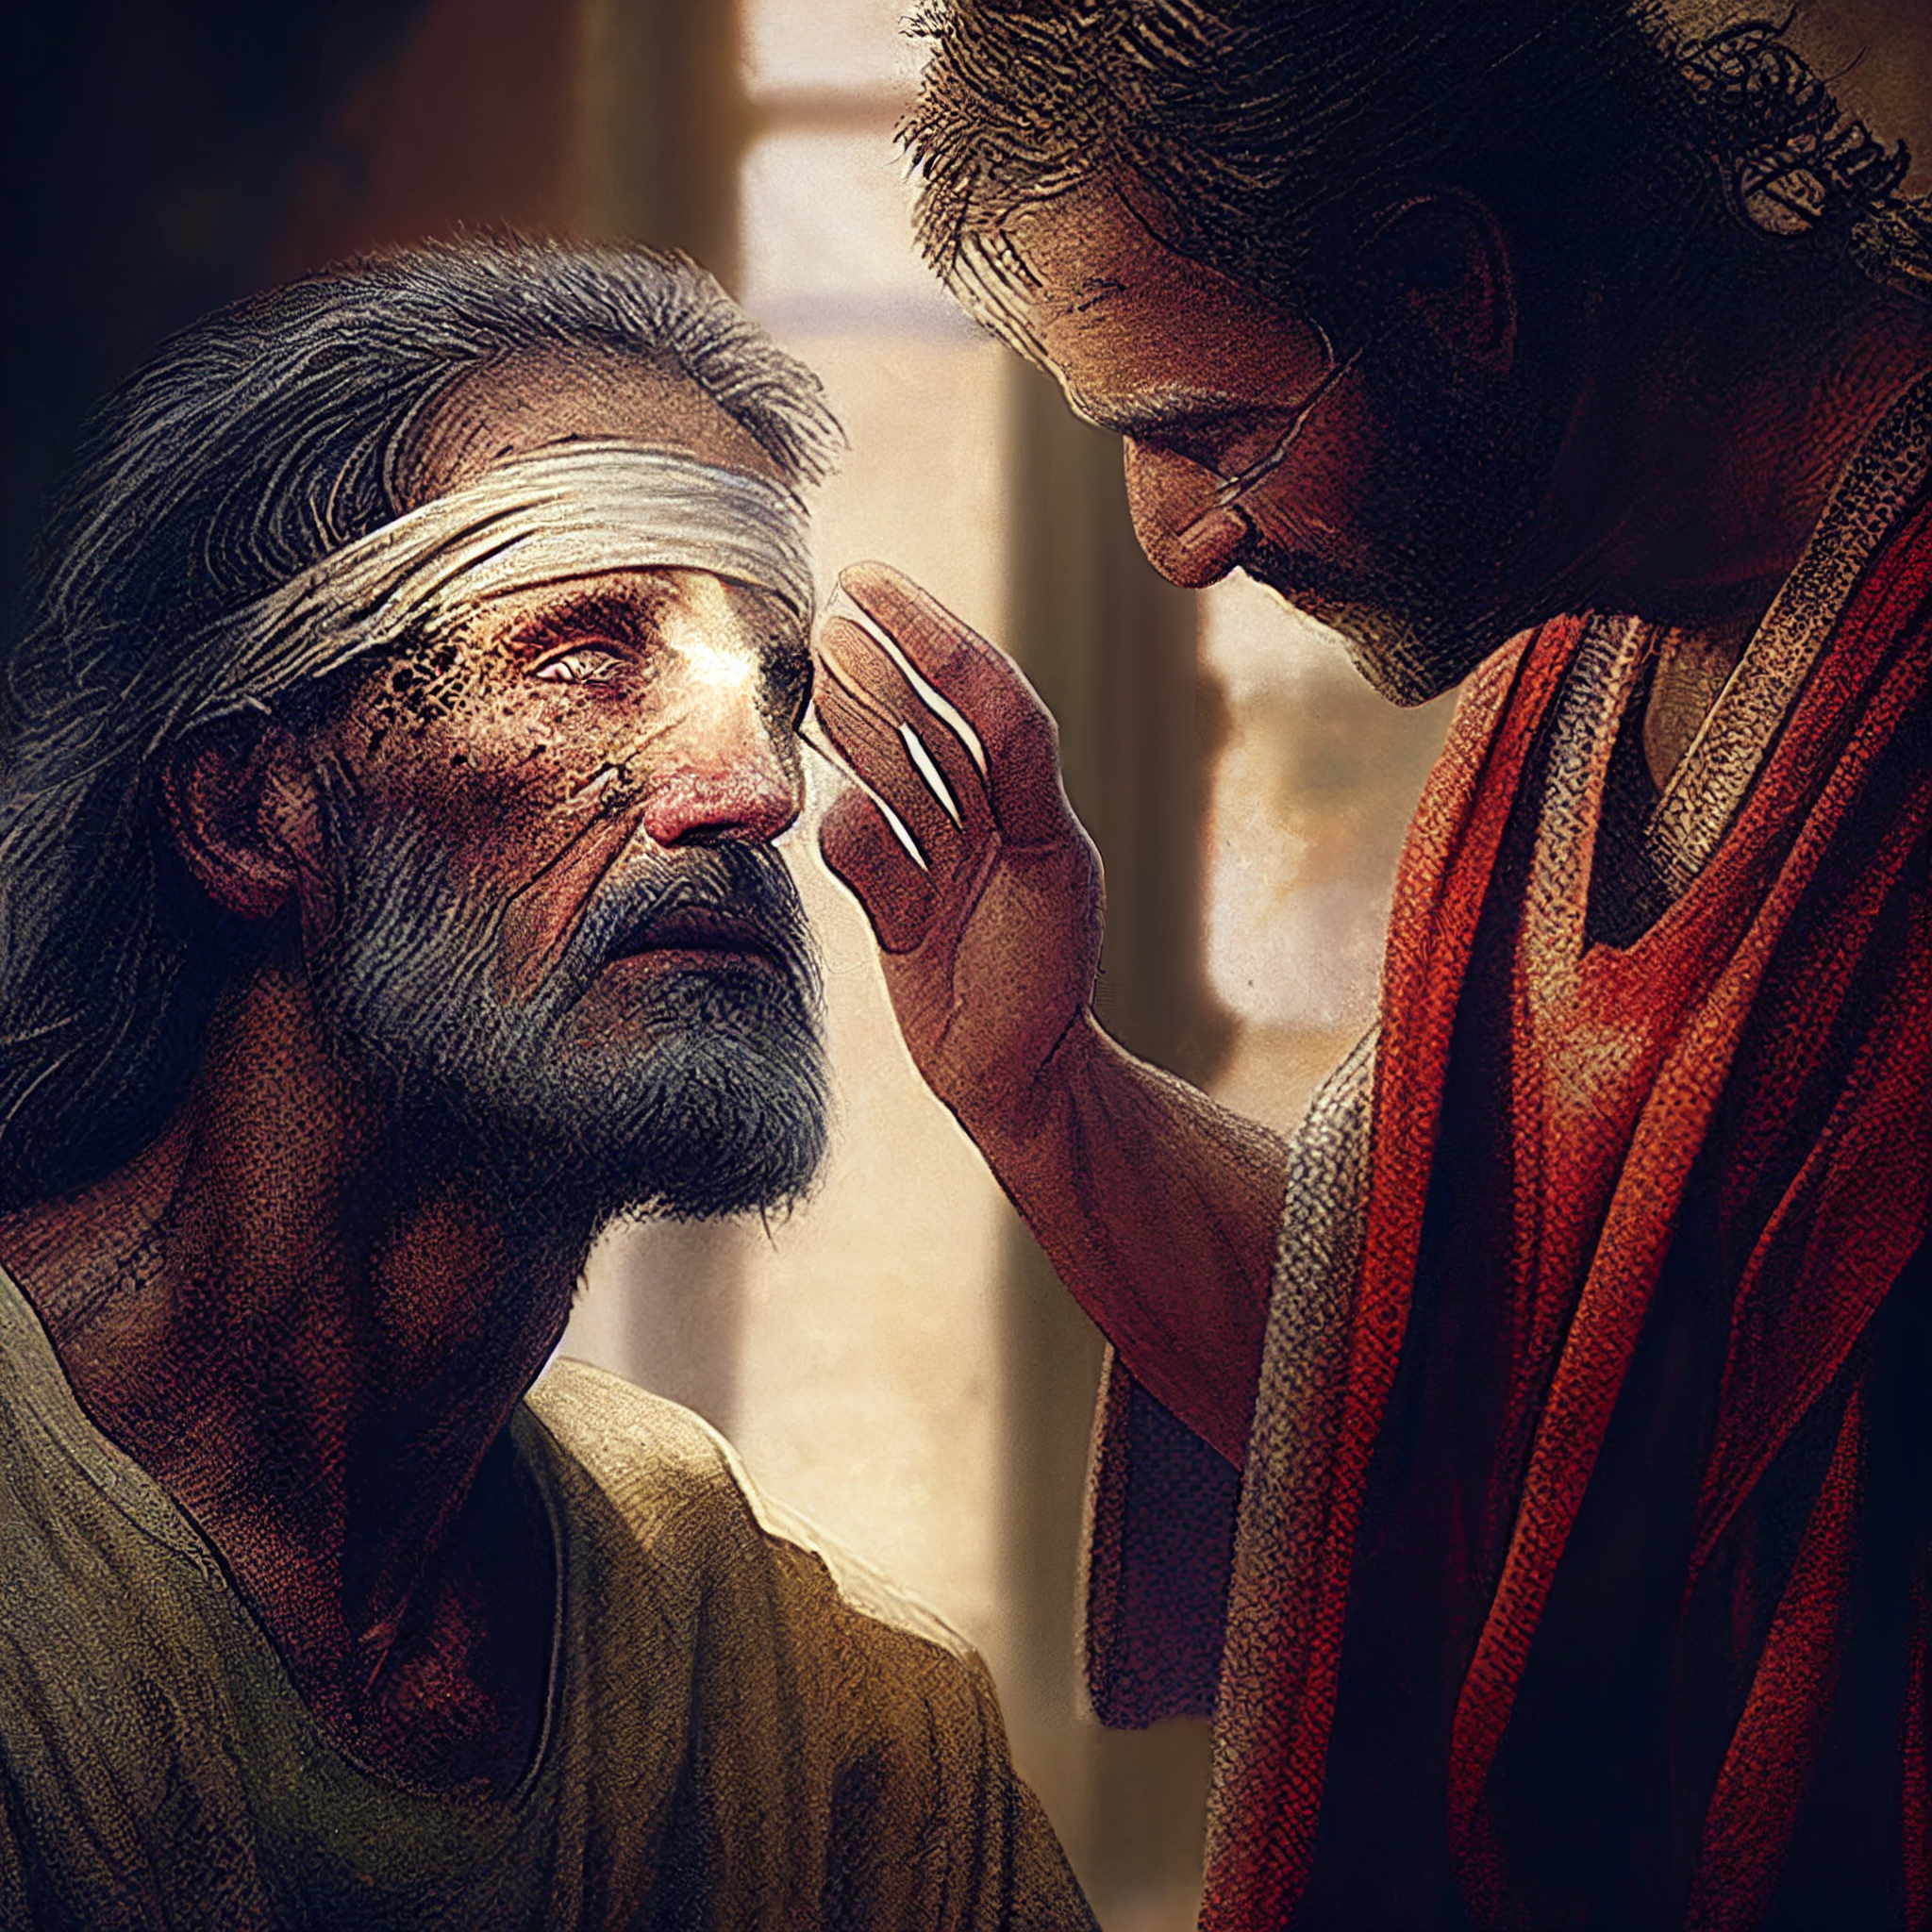 Story of the man born blind, healed by Jesus.